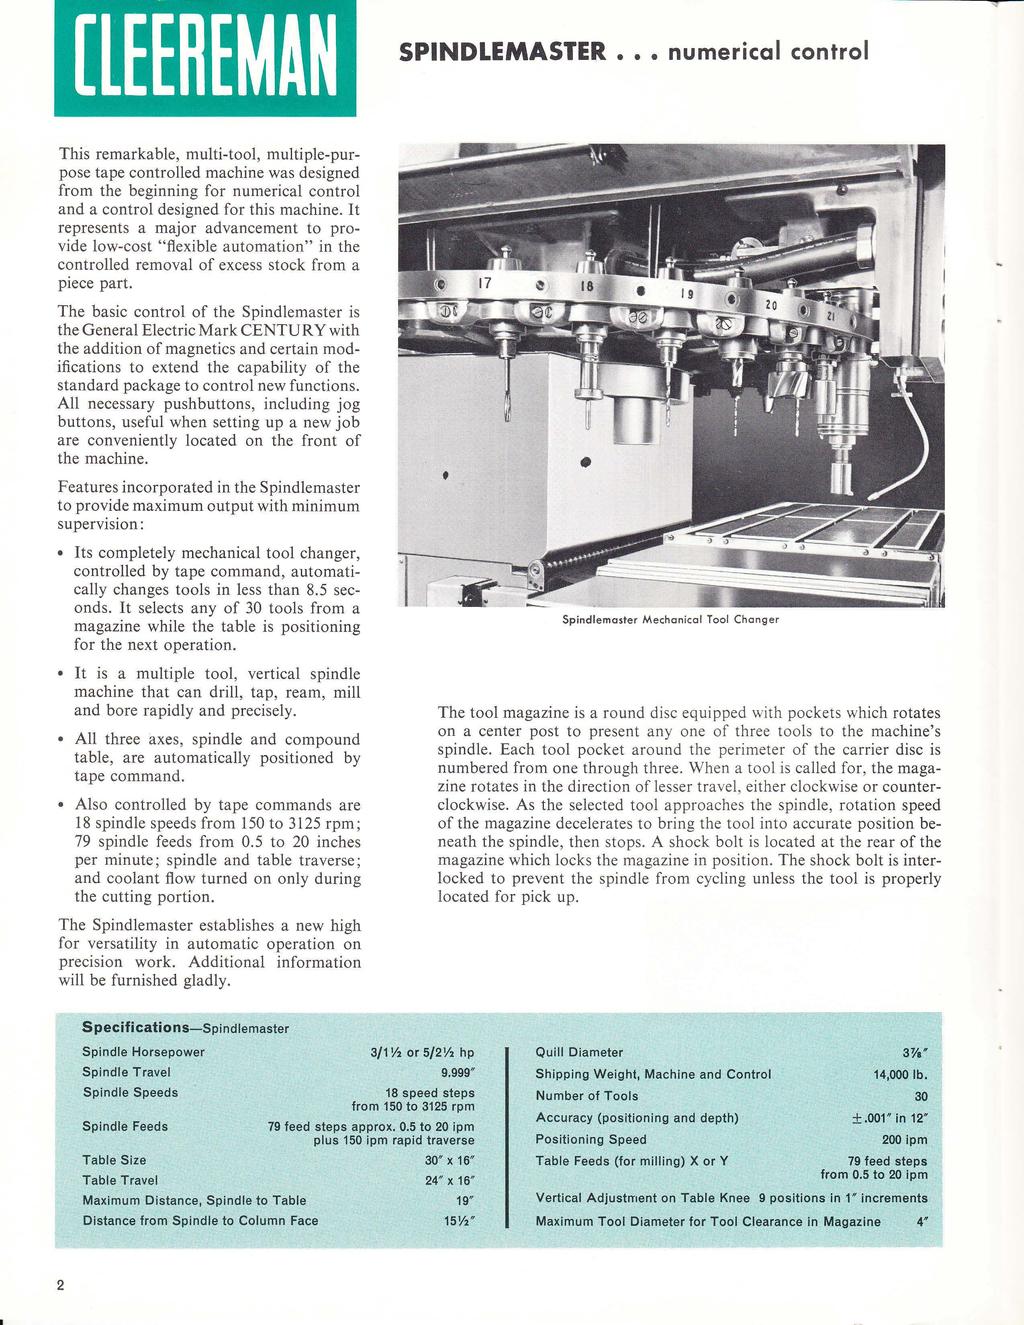 [leer~man SPINDLEMASTER numerical control This remarkable, multi-tool, multiple-purpose tape controlled machine was designed from the beginning for numerical control and a control designed for this